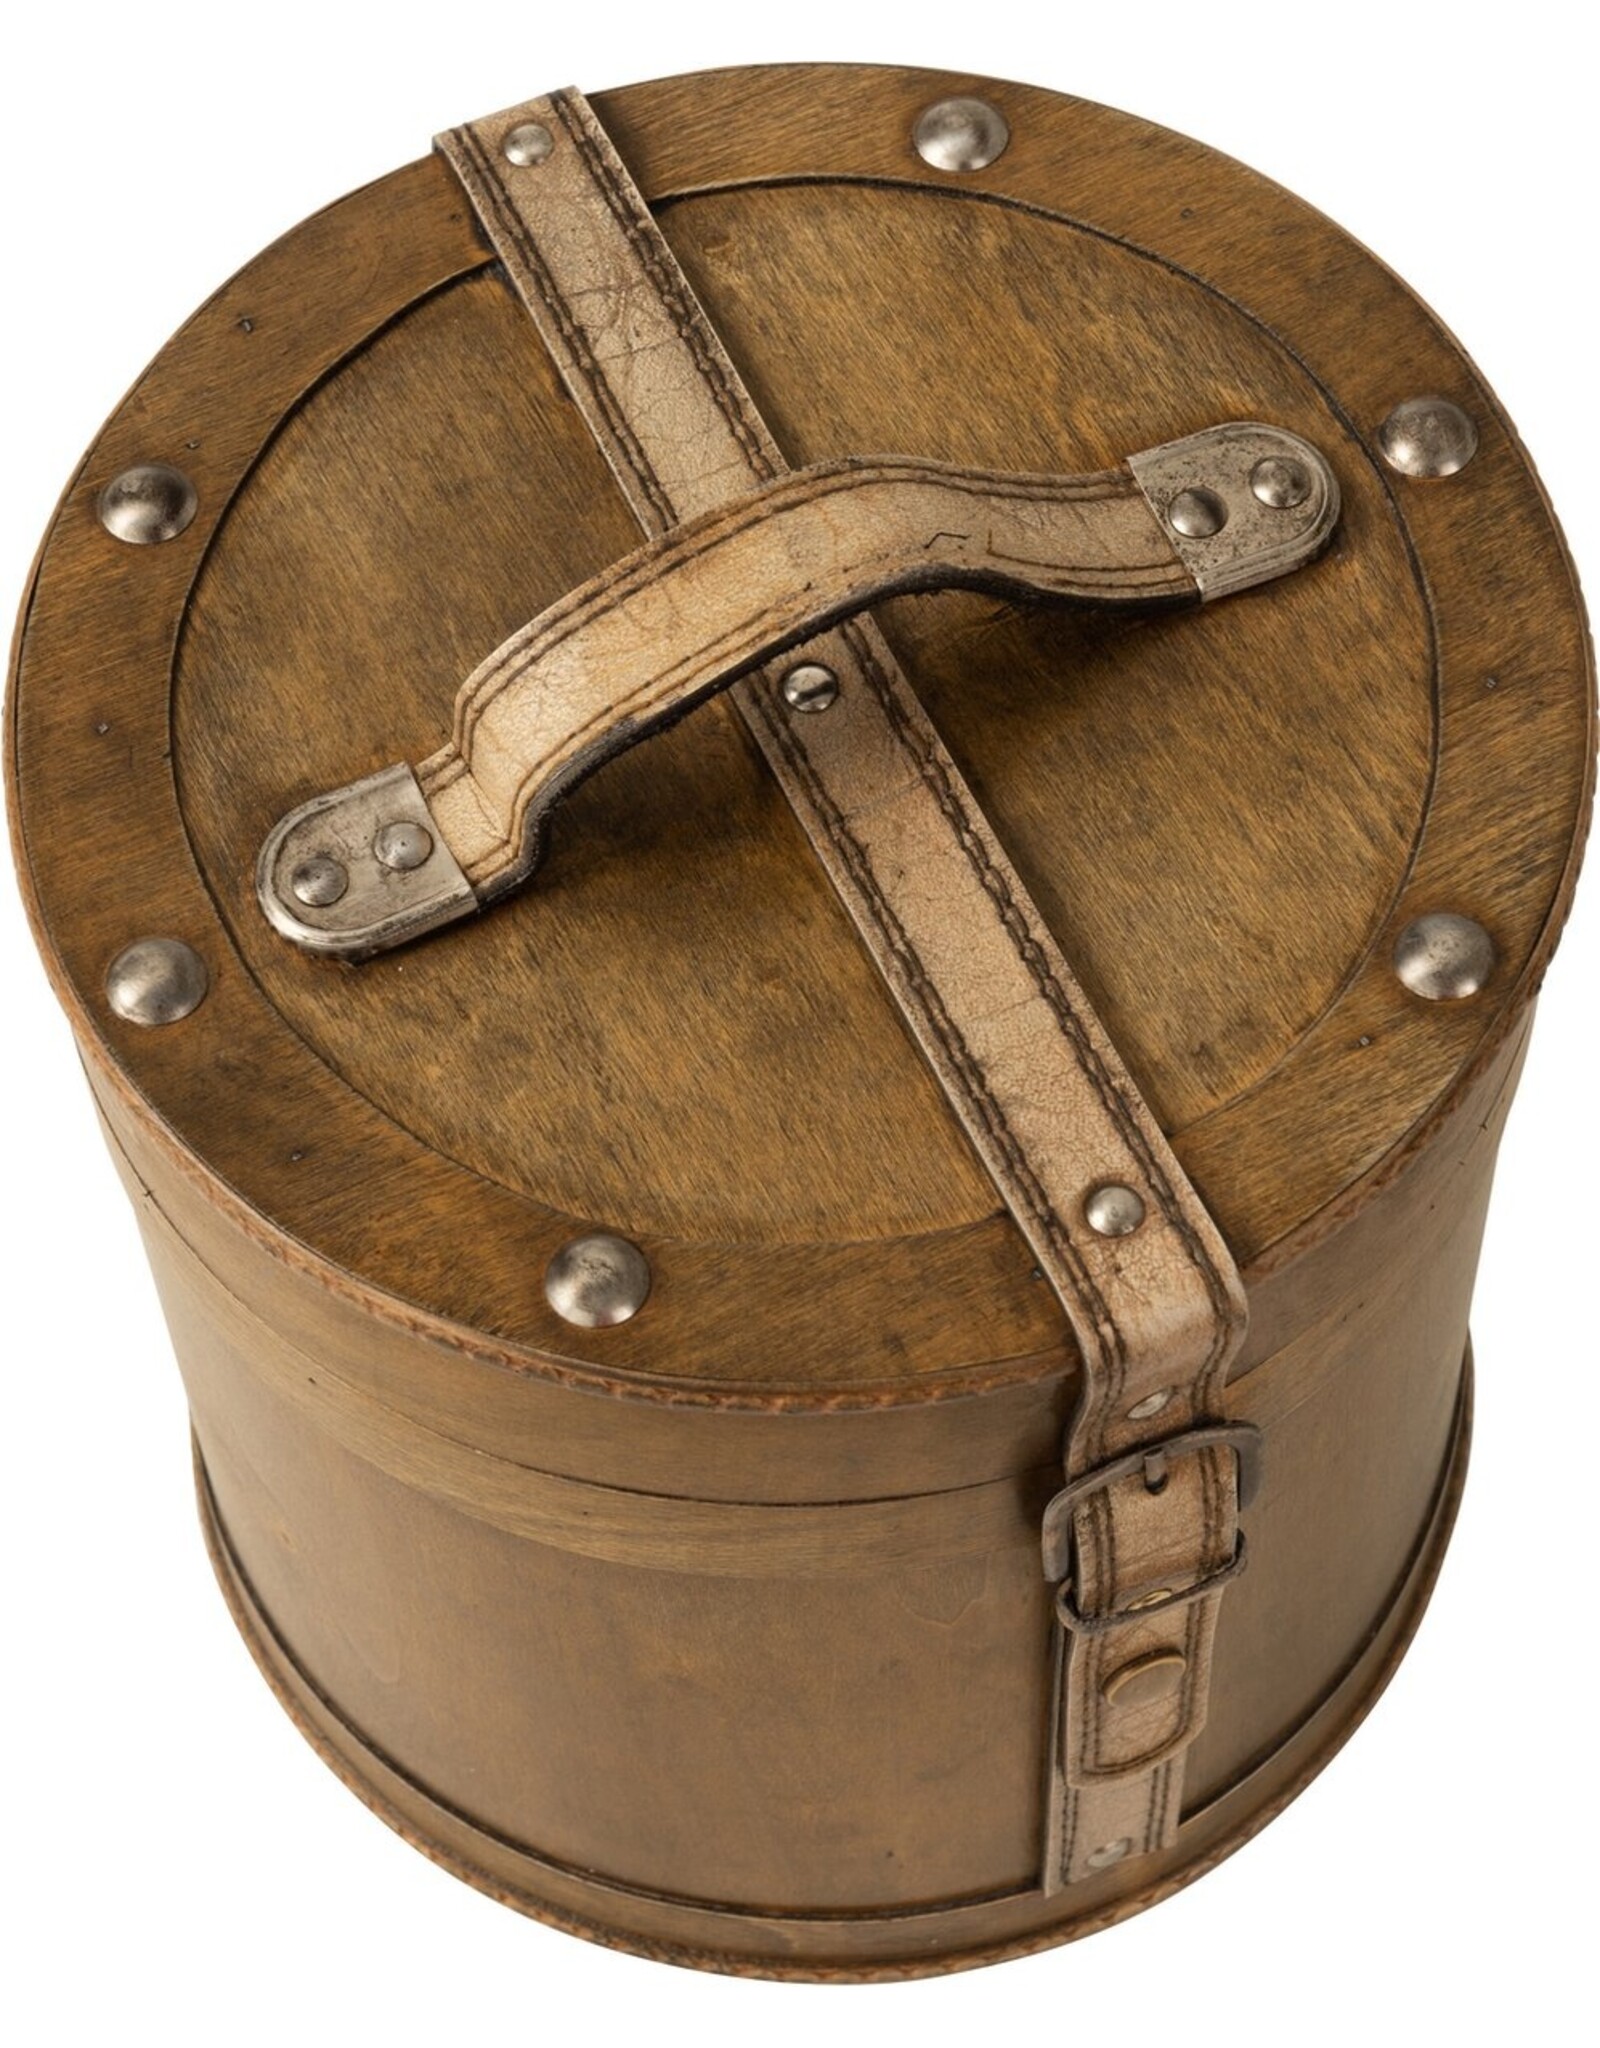 Miscellaneous - Steampunk Wooden Hat Box set of 2